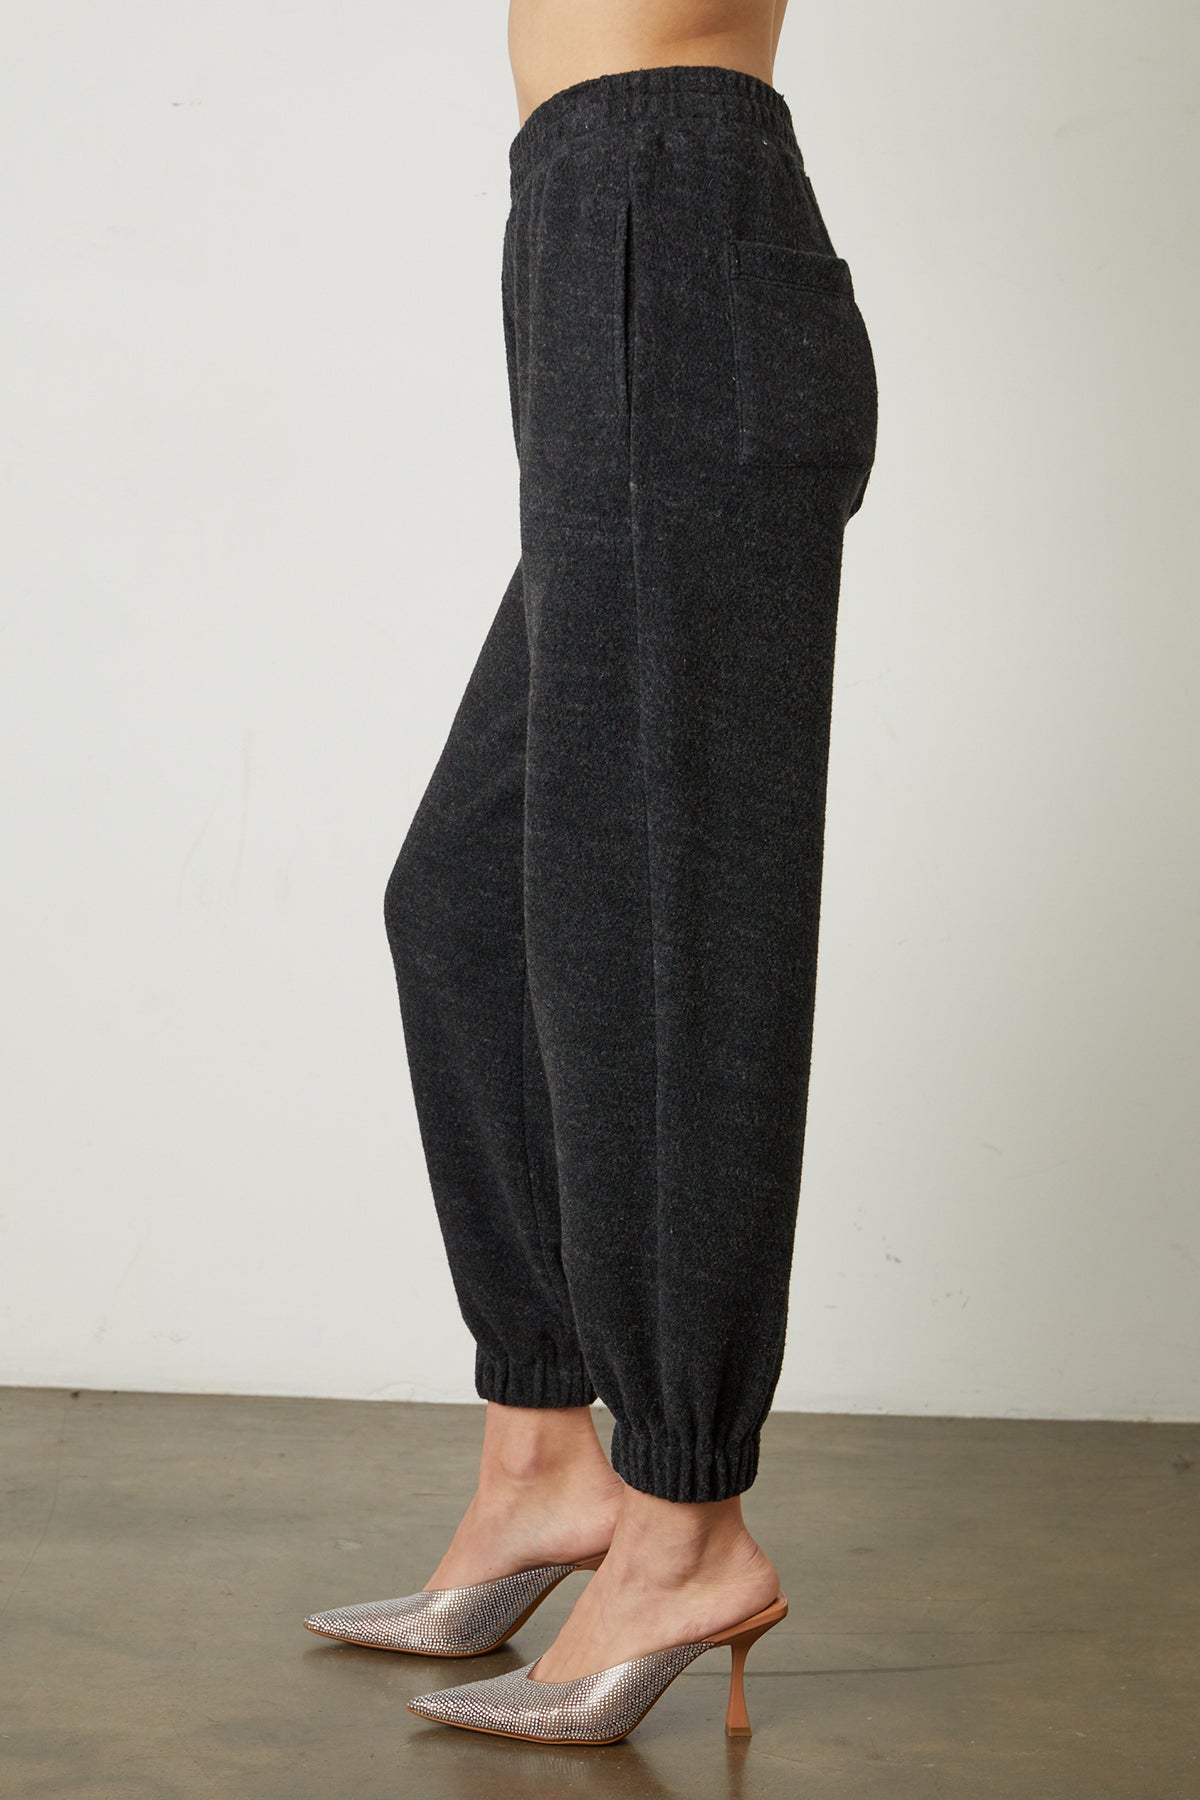 The model is wearing a pair of Velvet by Graham & Spencer BROOKIE FLEECE JOGGER pants.-26068049952961